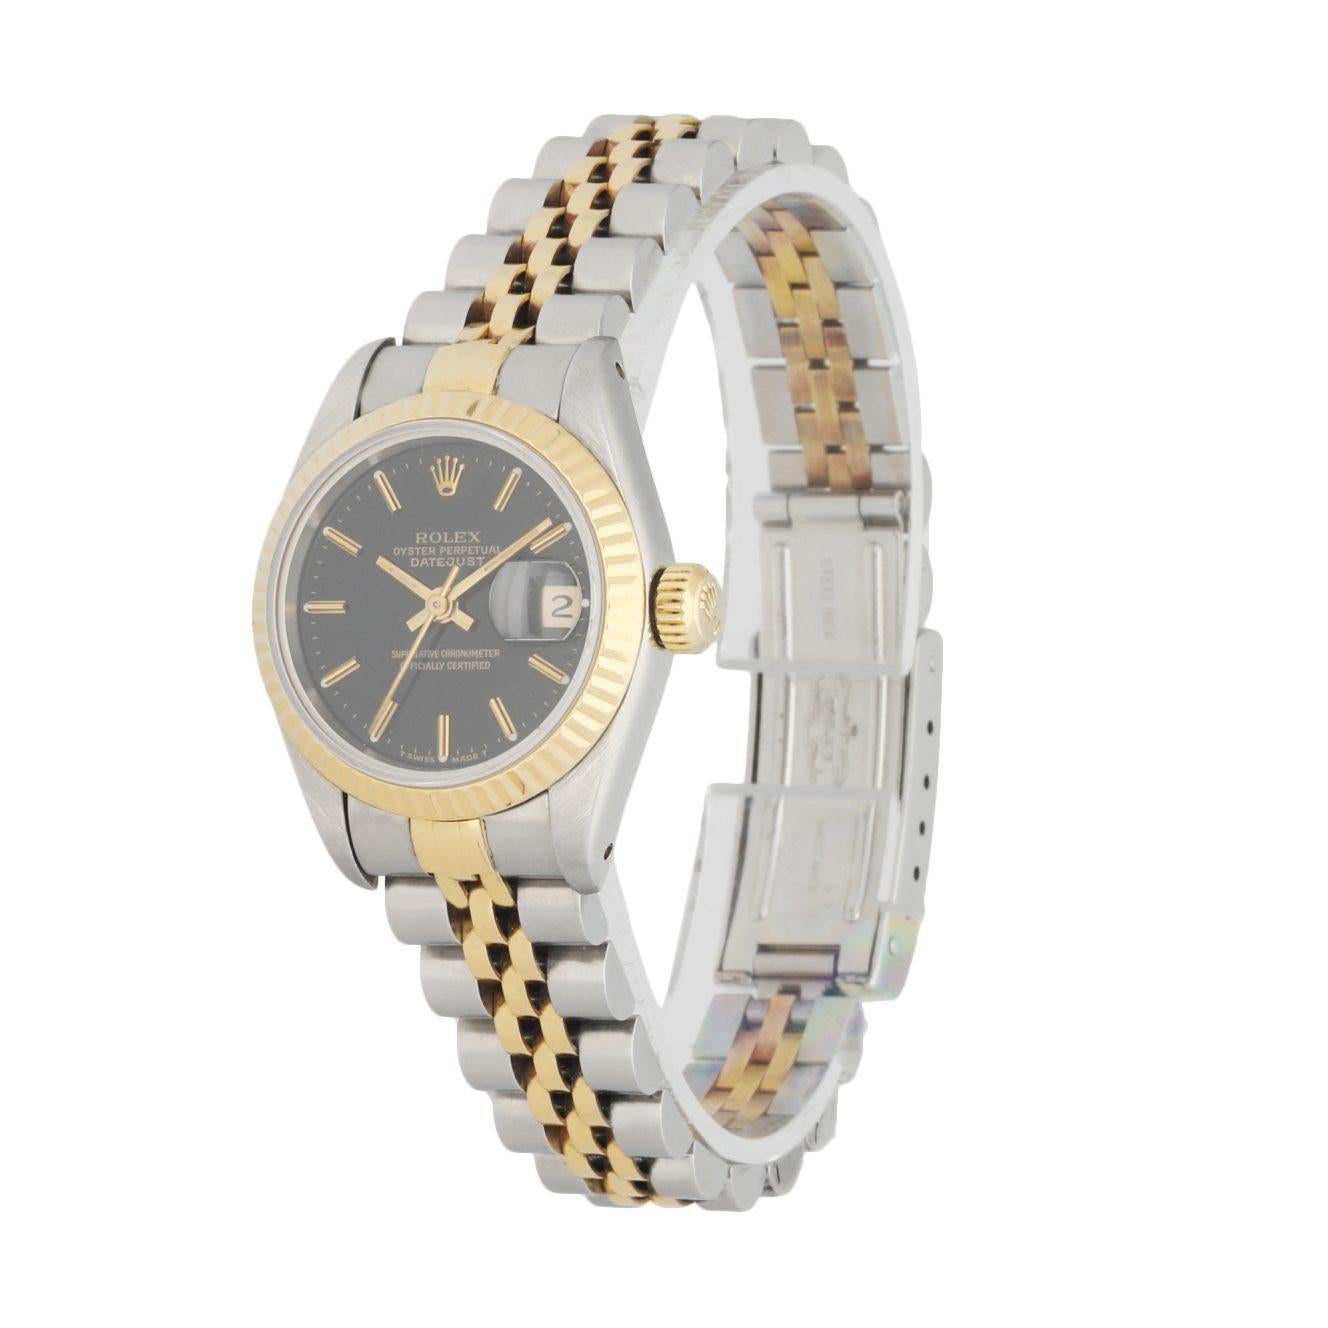 Rolex Datejust 69173 Ladies Watch. 26mm Stainless Steel case. 18K Yellow GoldÂ fluted bezel.Â Black dial with Luminous gold hands and index hour markers. Minute markers on the outer dial. Date display at the 3 o'clock position. Stainless Steel & 18K